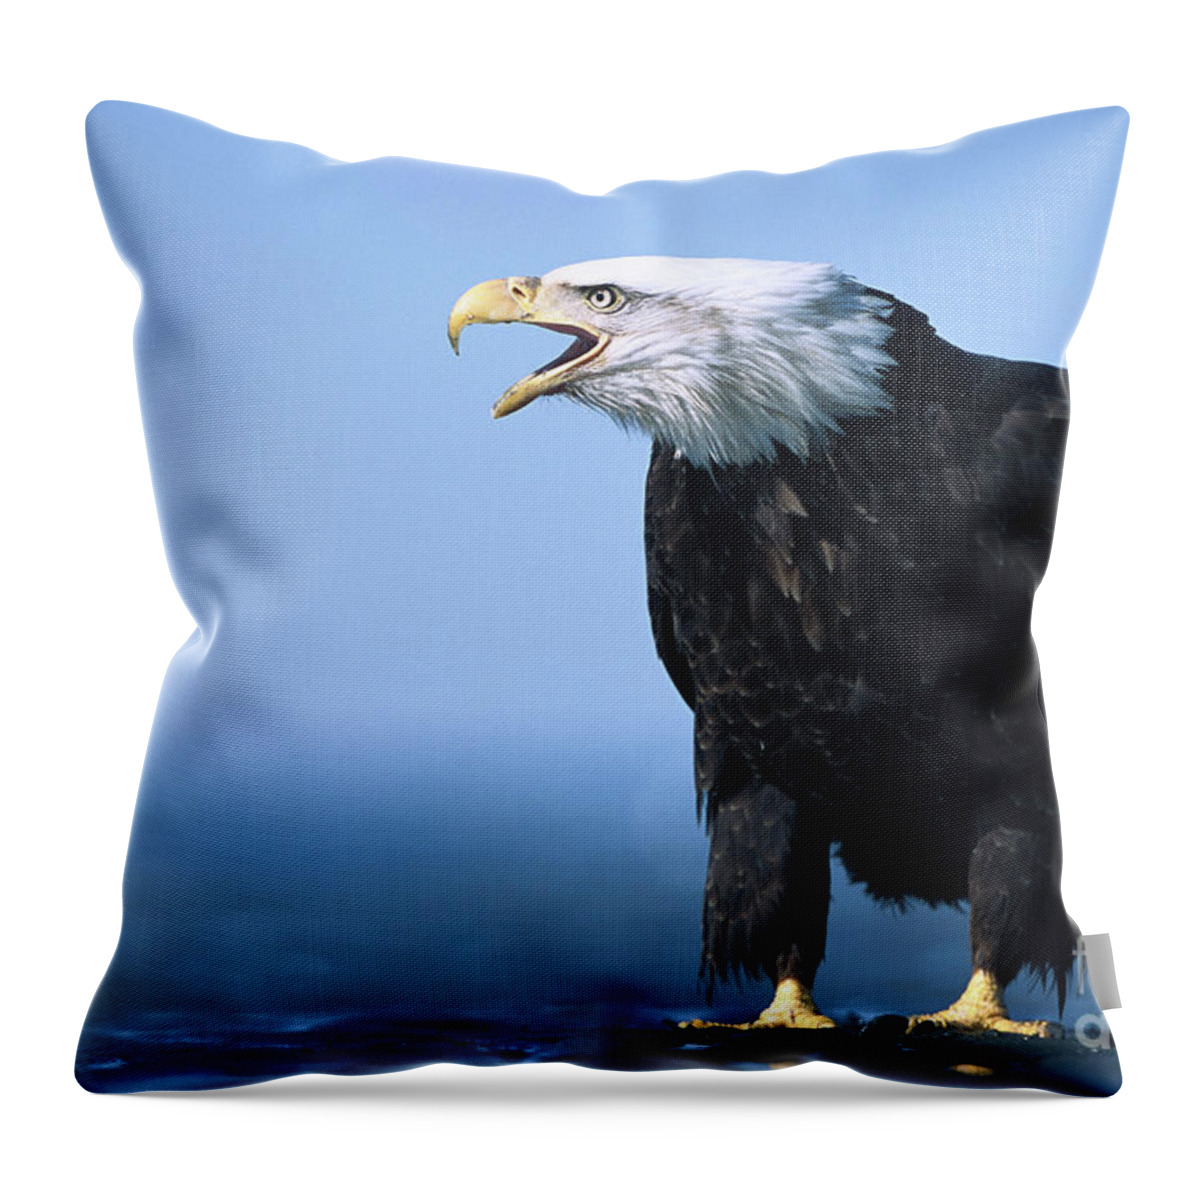 00343912 Throw Pillow featuring the photograph Bald Eagle Calling by Yva Momatiuk John Eastcott